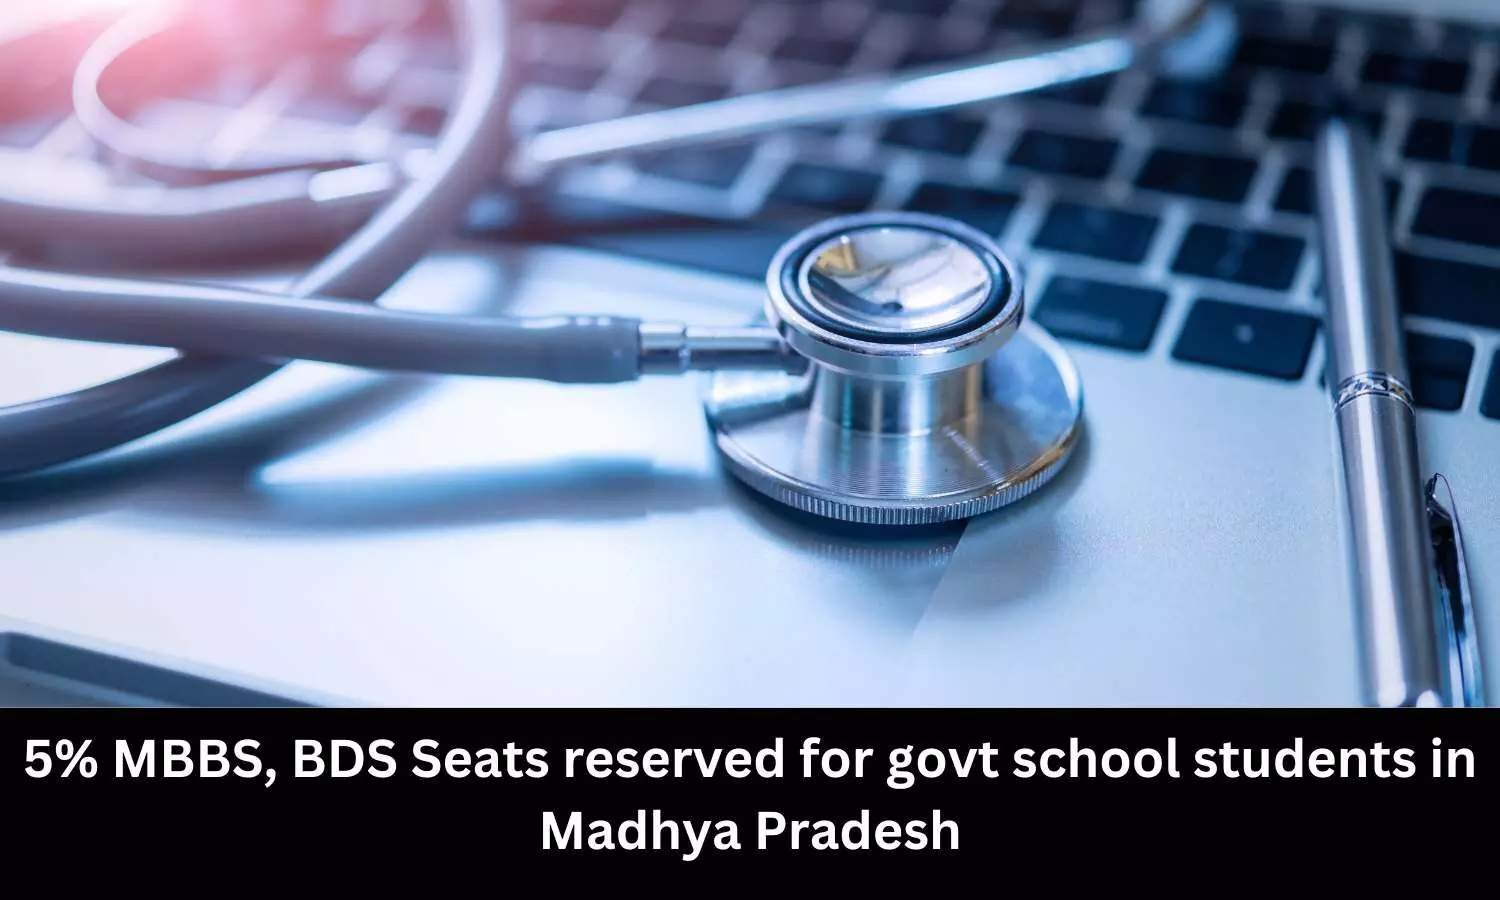 MP Govt allows reservation of 5 percent MBBS, BDS seats for Govt school students